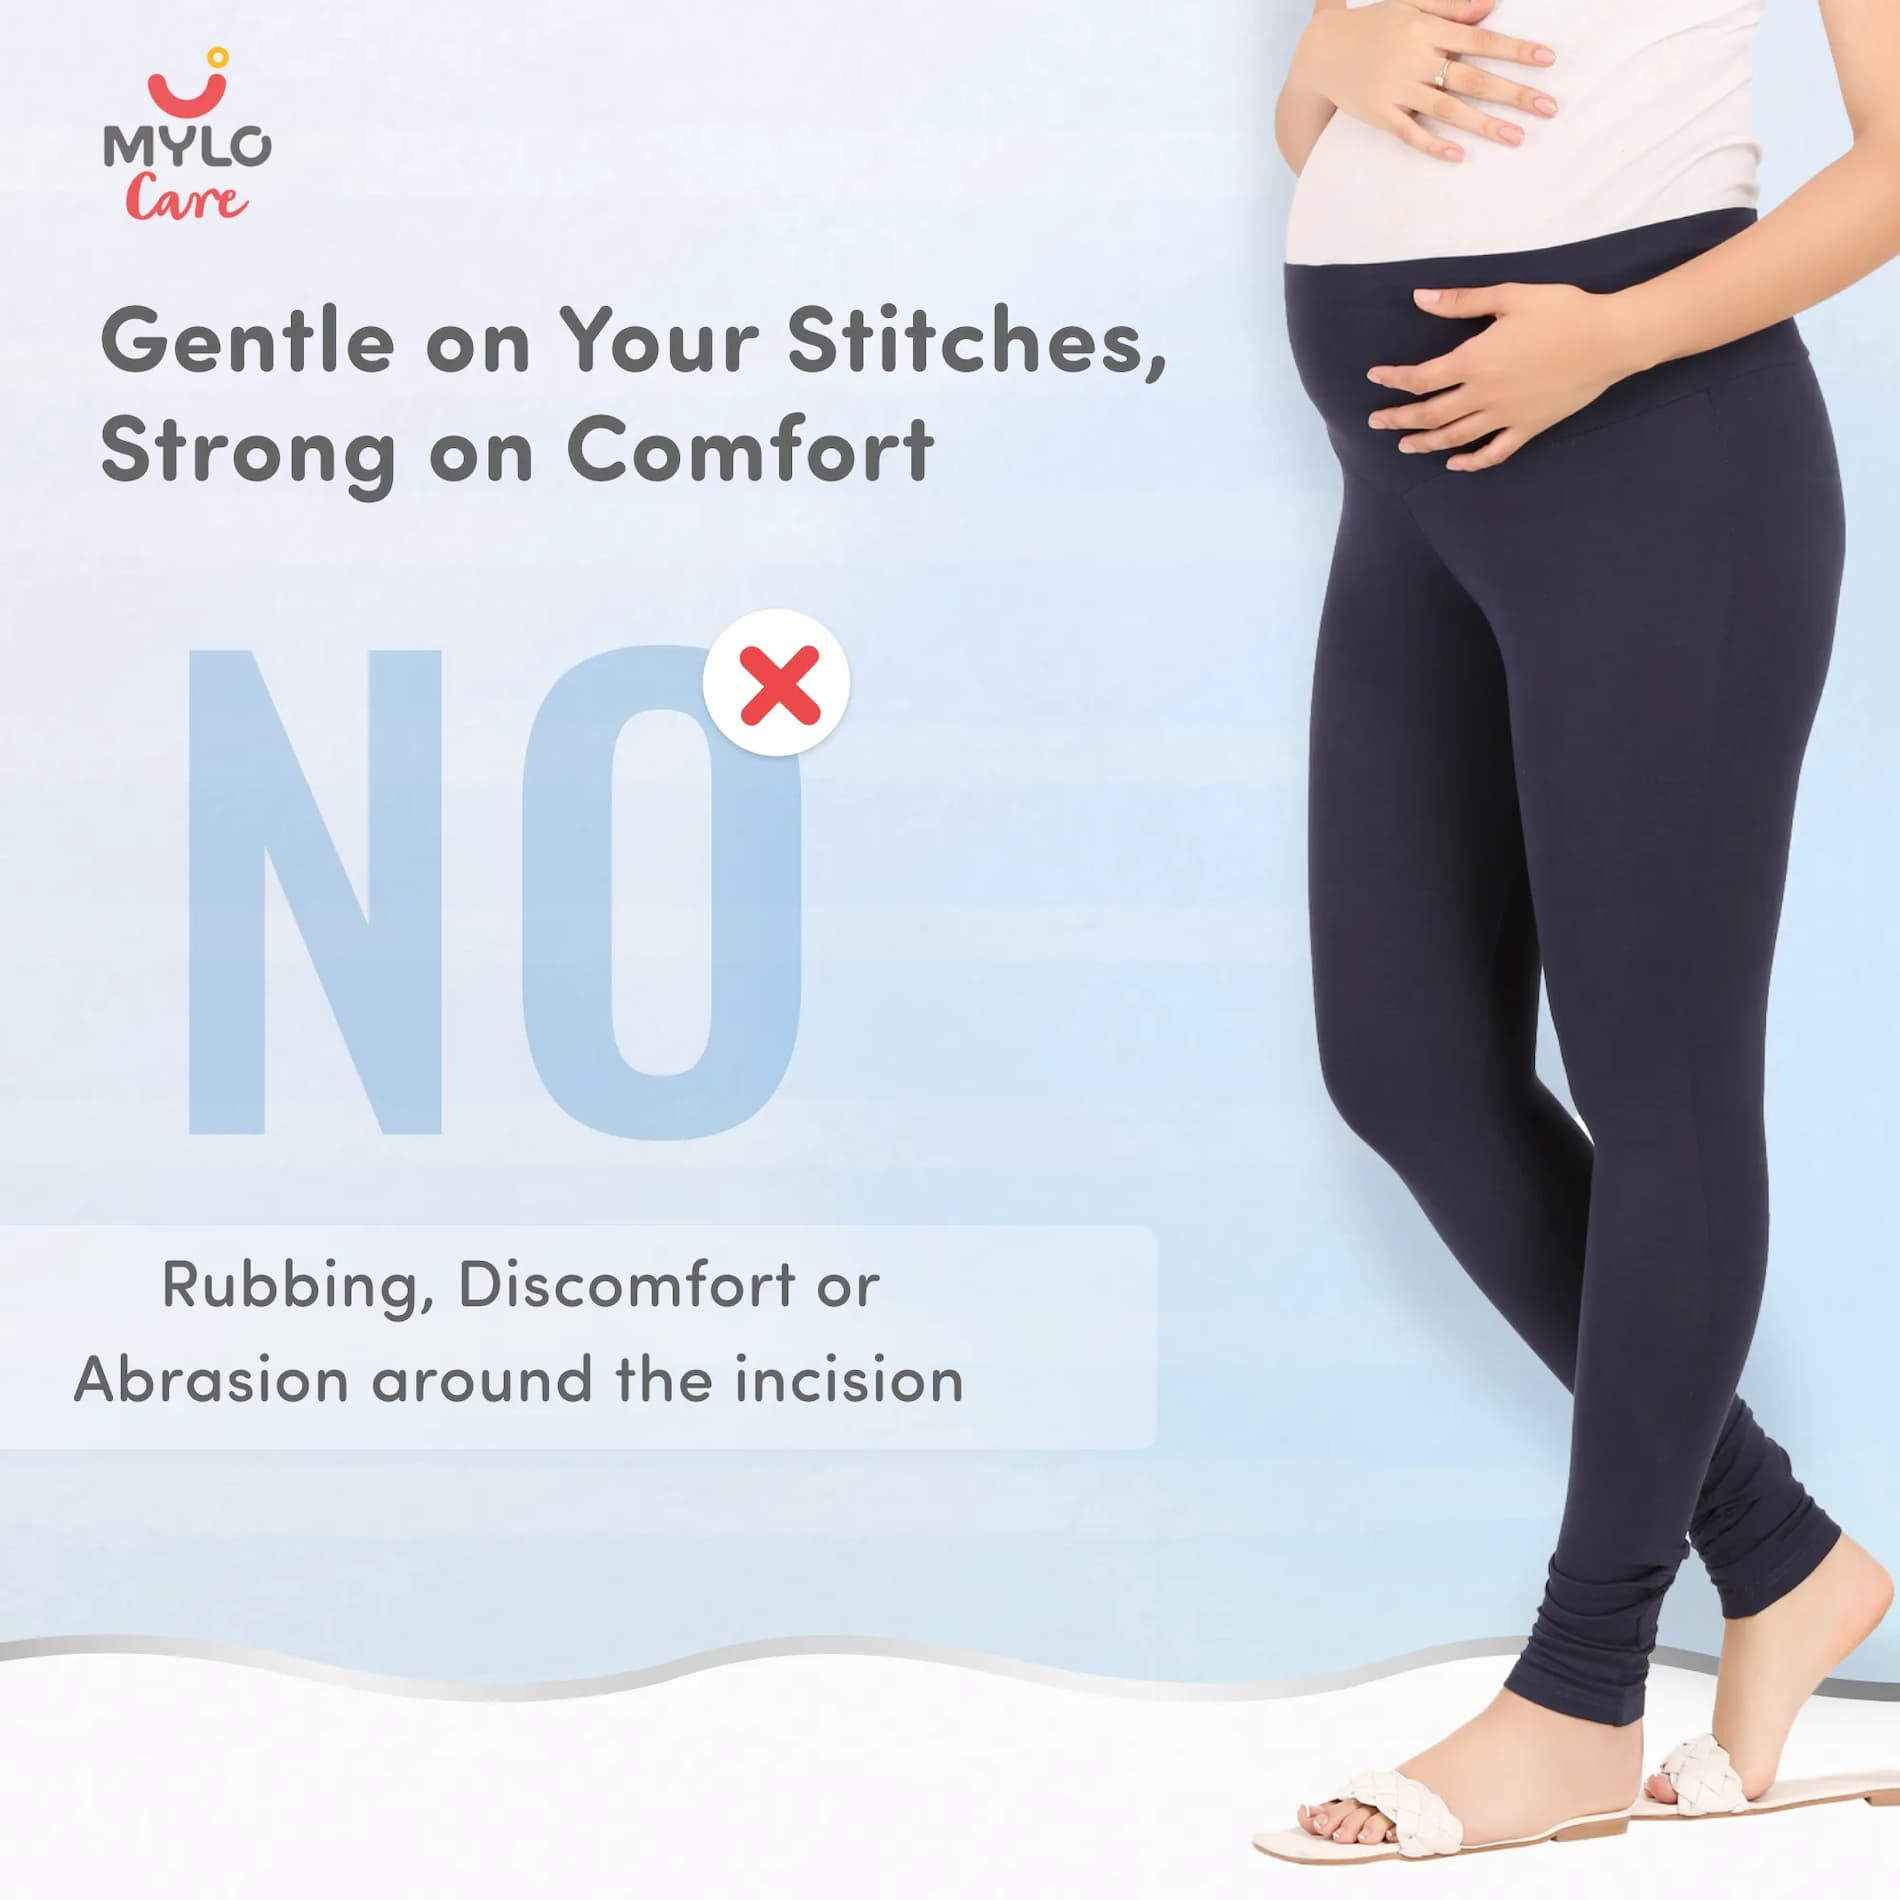 Stretchable Maternity Leggings for Women | Comfortable, Soft & Gentle on the Skin | Ideal for Pre & Post Delivery - Navy - L